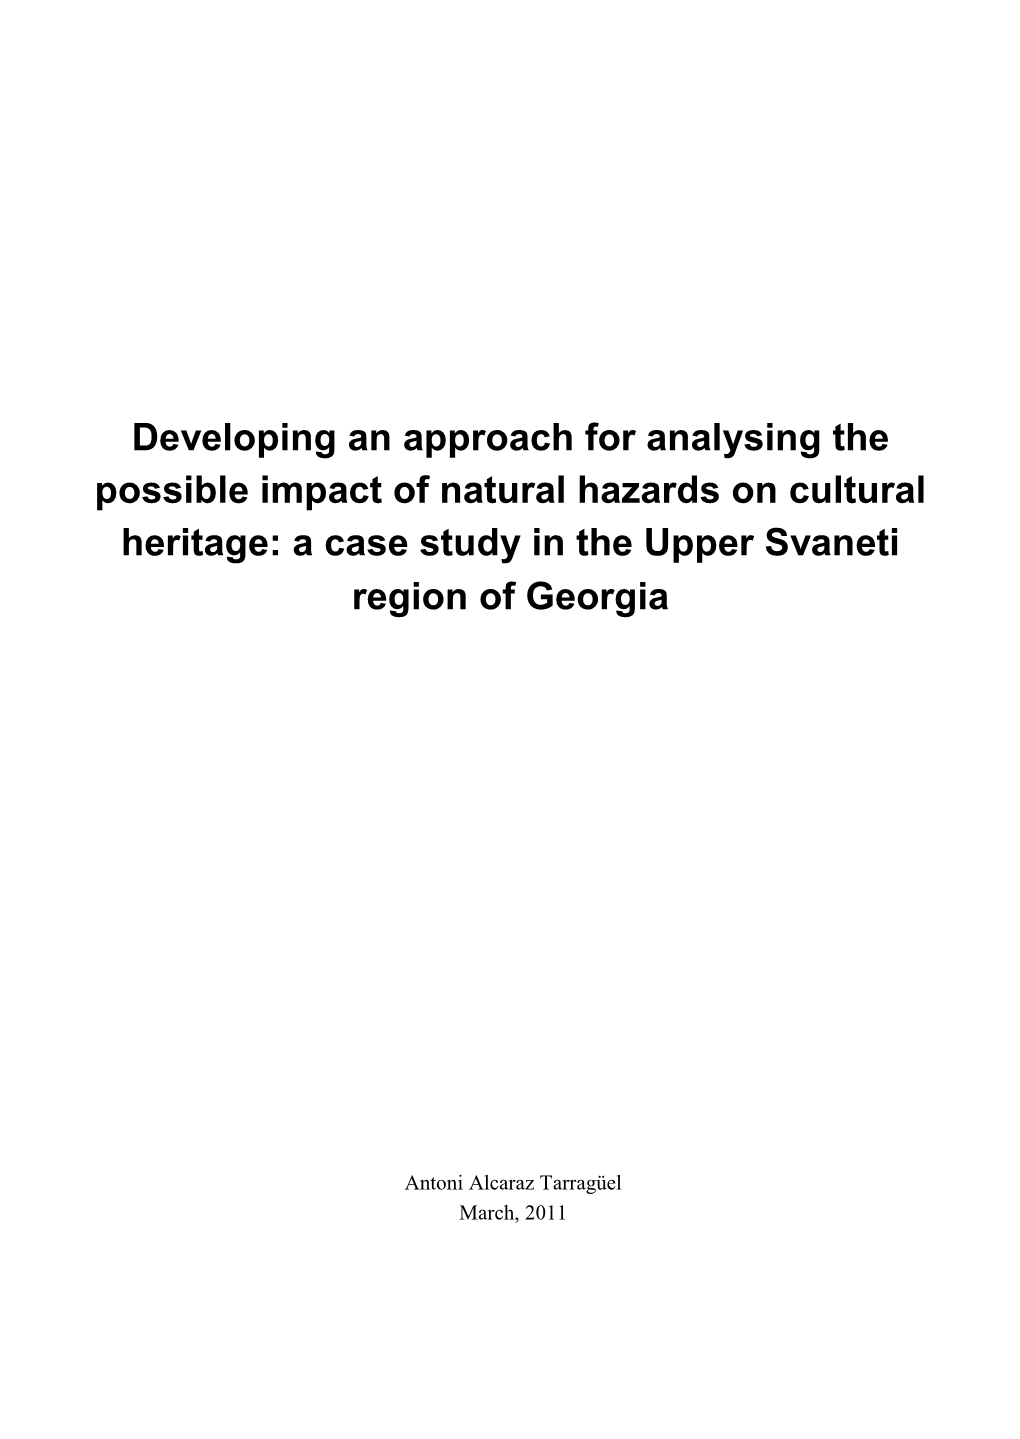 Developing an Approach for Analysing the Possible Impact of Natural Hazards on Cultural Heritage: a Case Study in the Upper Svaneti Region of Georgia